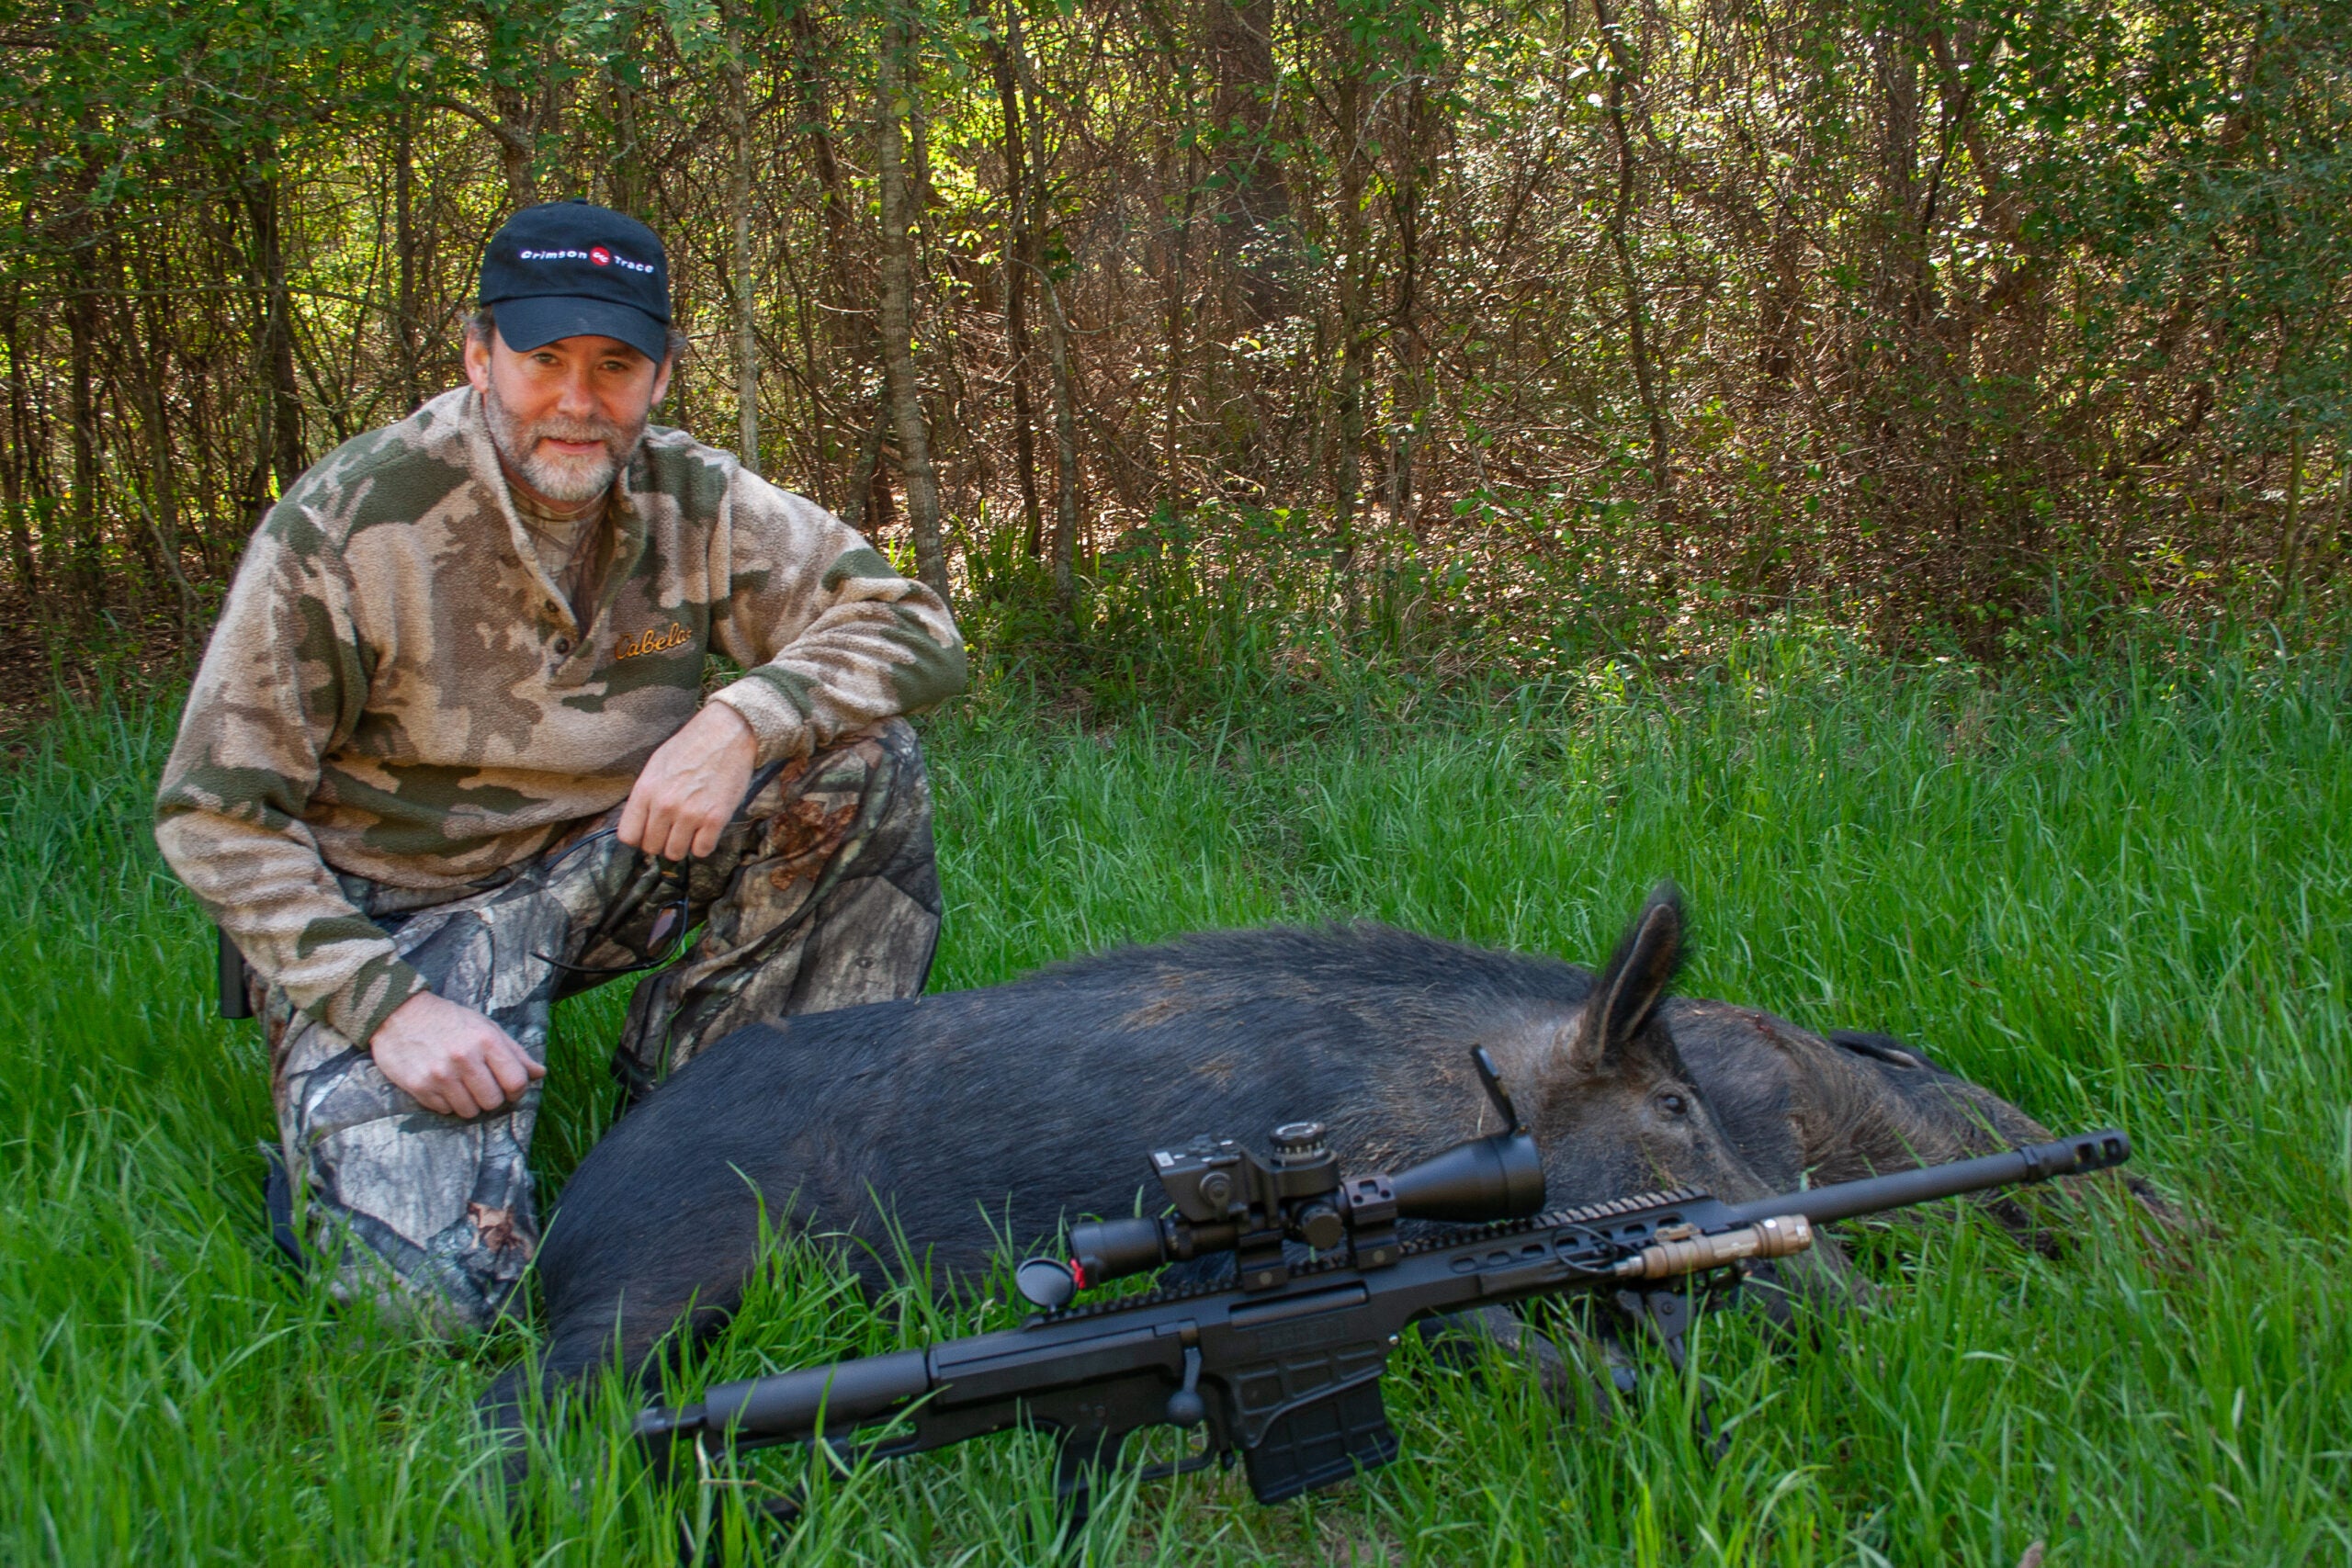 Hunter kneeling in the grass next to two wild hogs, with a 338 Lapua rifle in the foreground